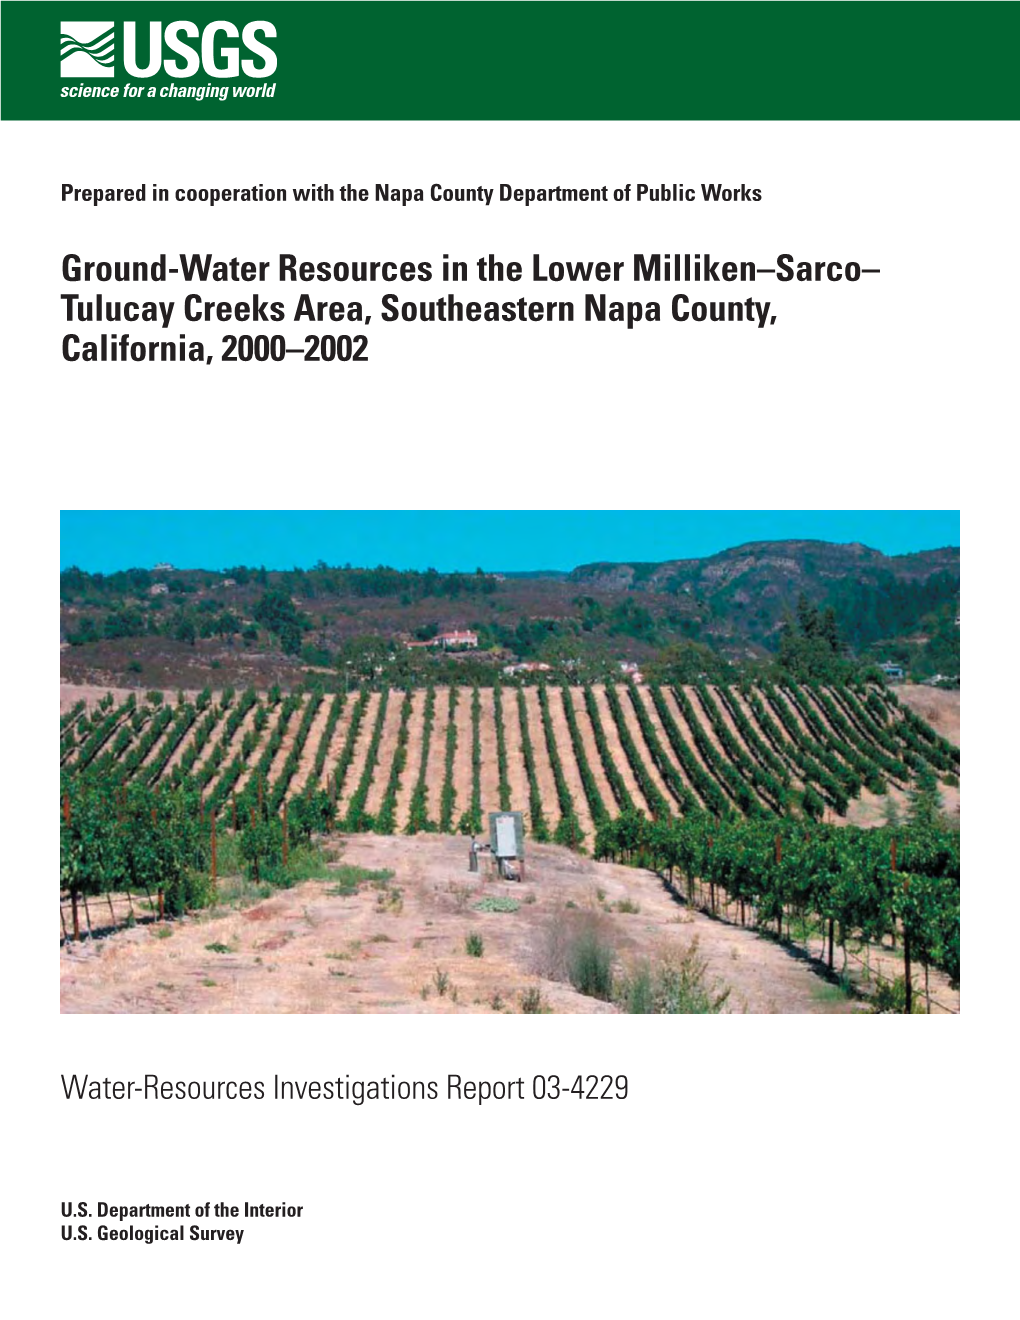 Ground-Water Resources in the Lower Milliken–Sarco– Tulucay Creeks Area, Southeastern Napa County, California, 2000–2002